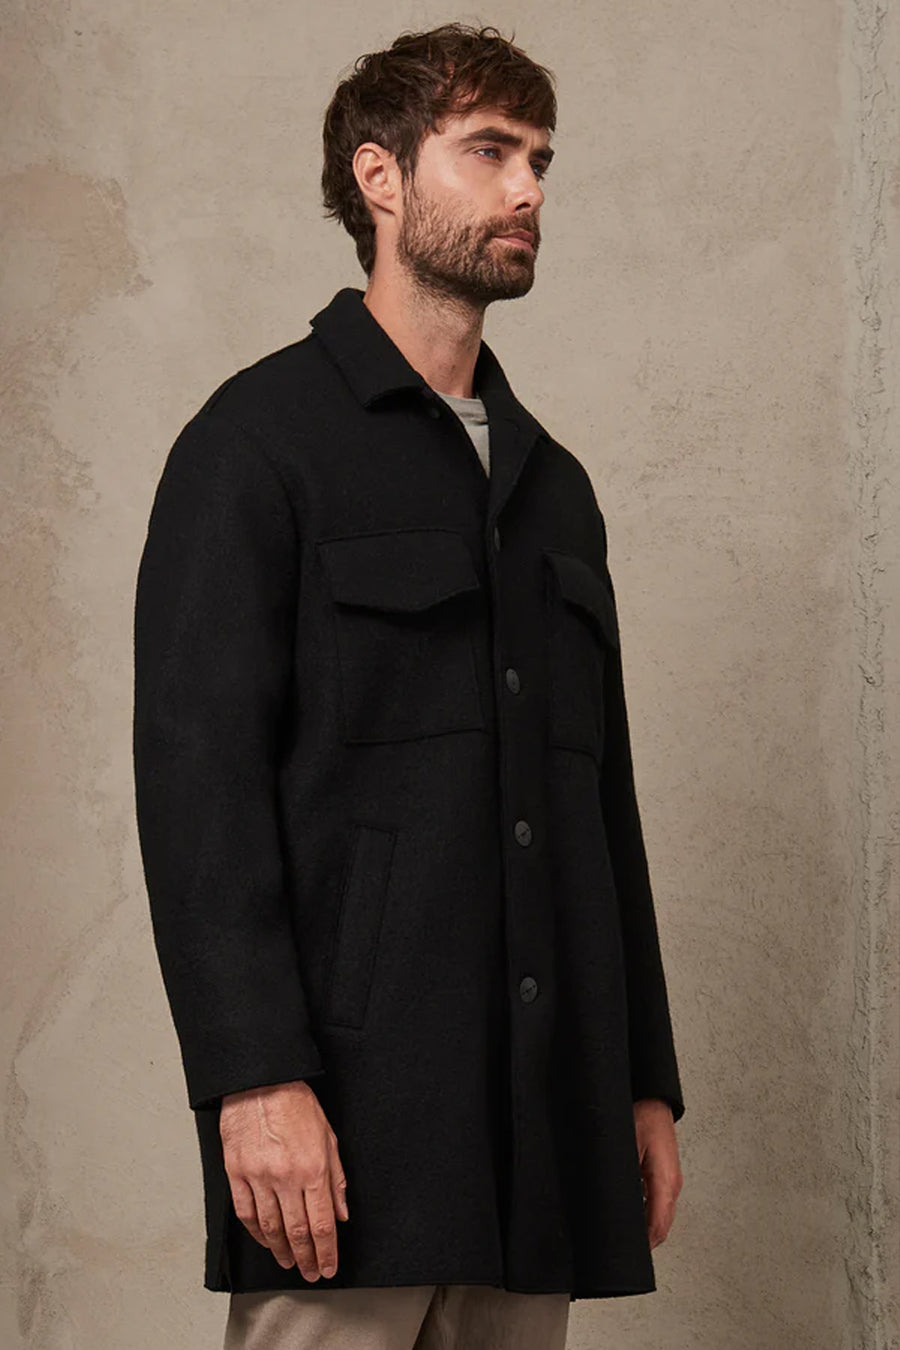 Buy the Transit Loose Fit Raw Cut Wool Coat Black at Intro. Spend £50 for free UK delivery. Official stockists. We ship worldwide.